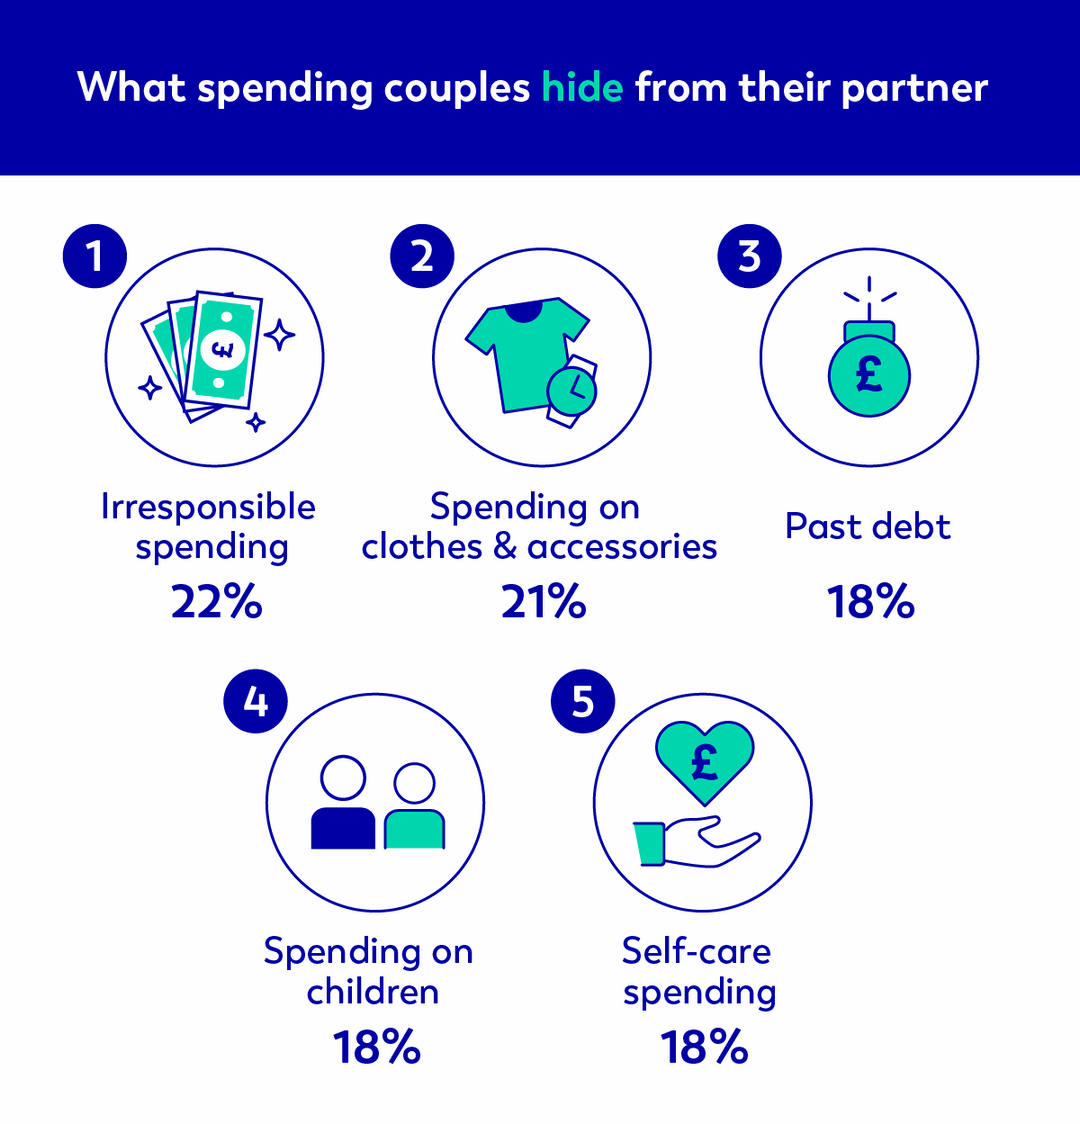 what spending couples hide from their partner? 1. Irresponsible spending 22% 2. Spending on clothes & accessories 21% 3. Past debt 18% 4.Spending on children 18% 5. Self-care spending 18%